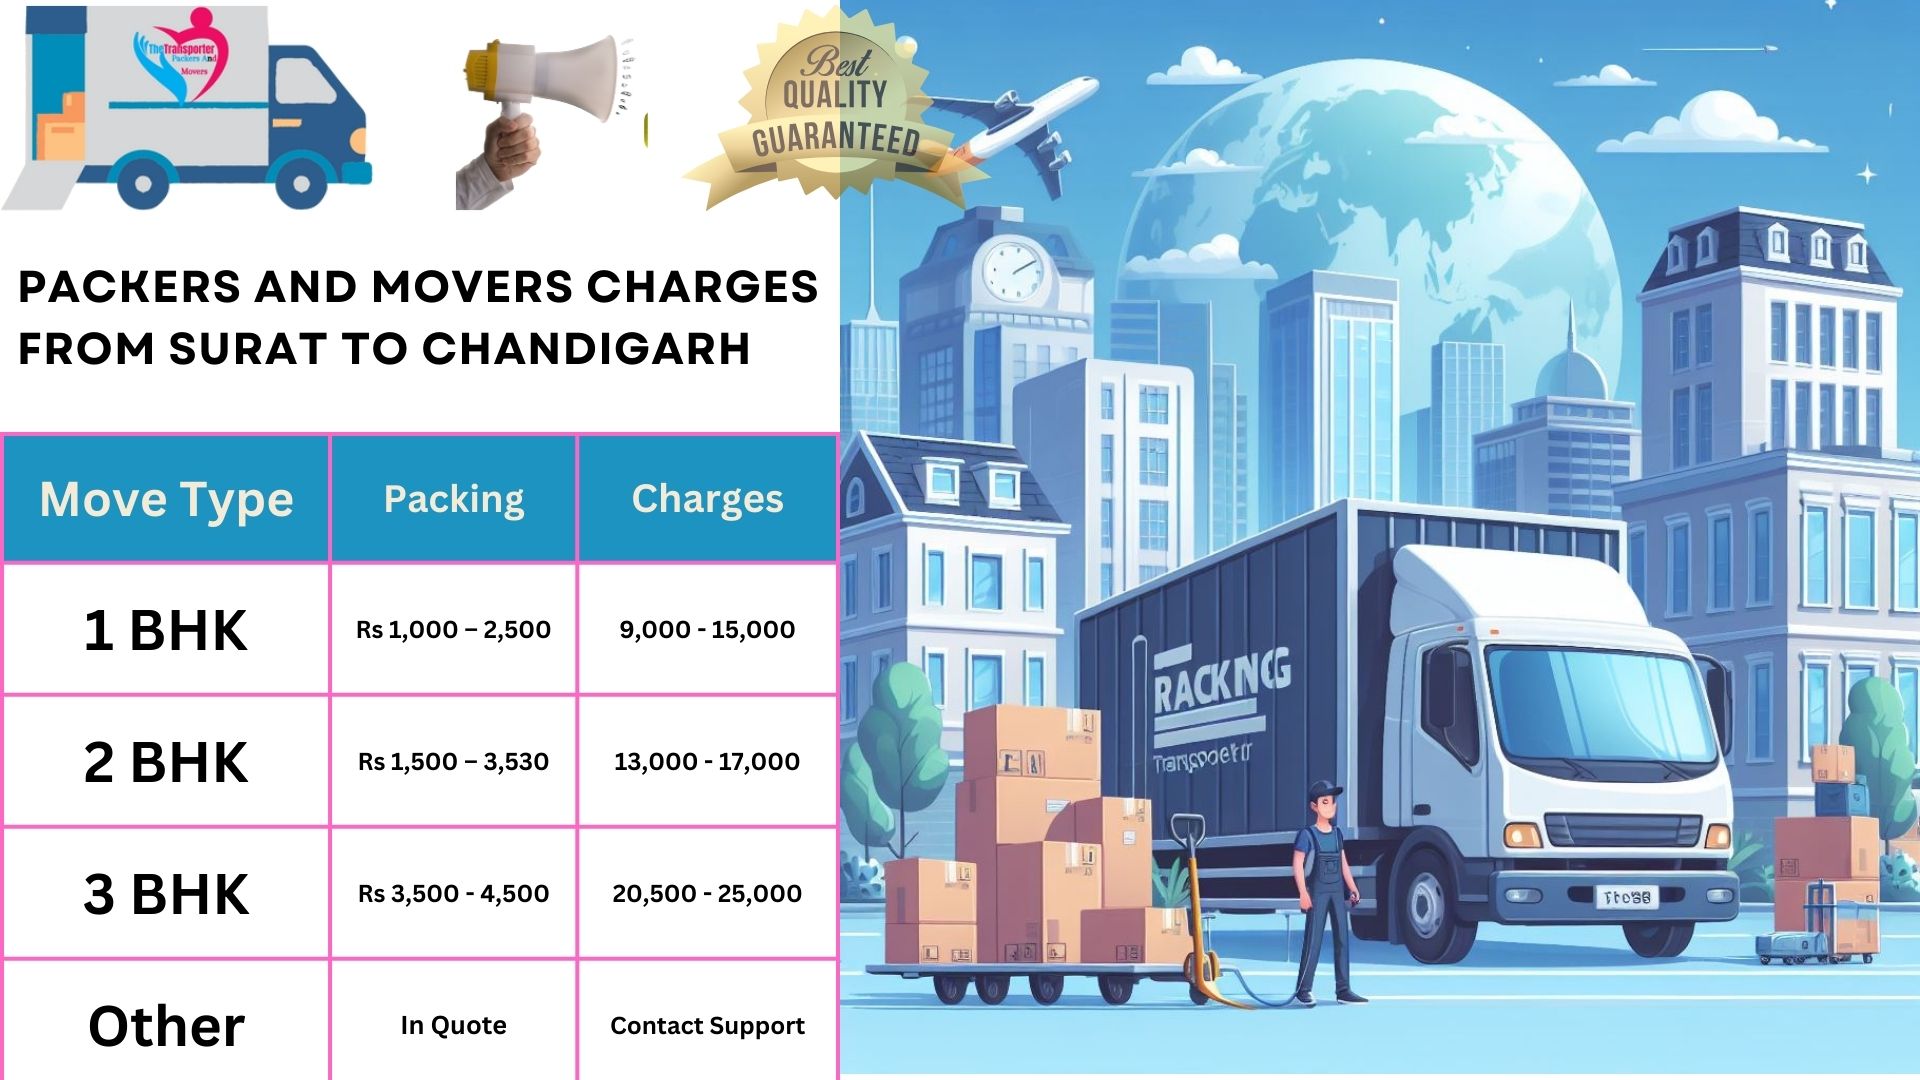 Movers and Packers charges list From Surat to Chandigarh